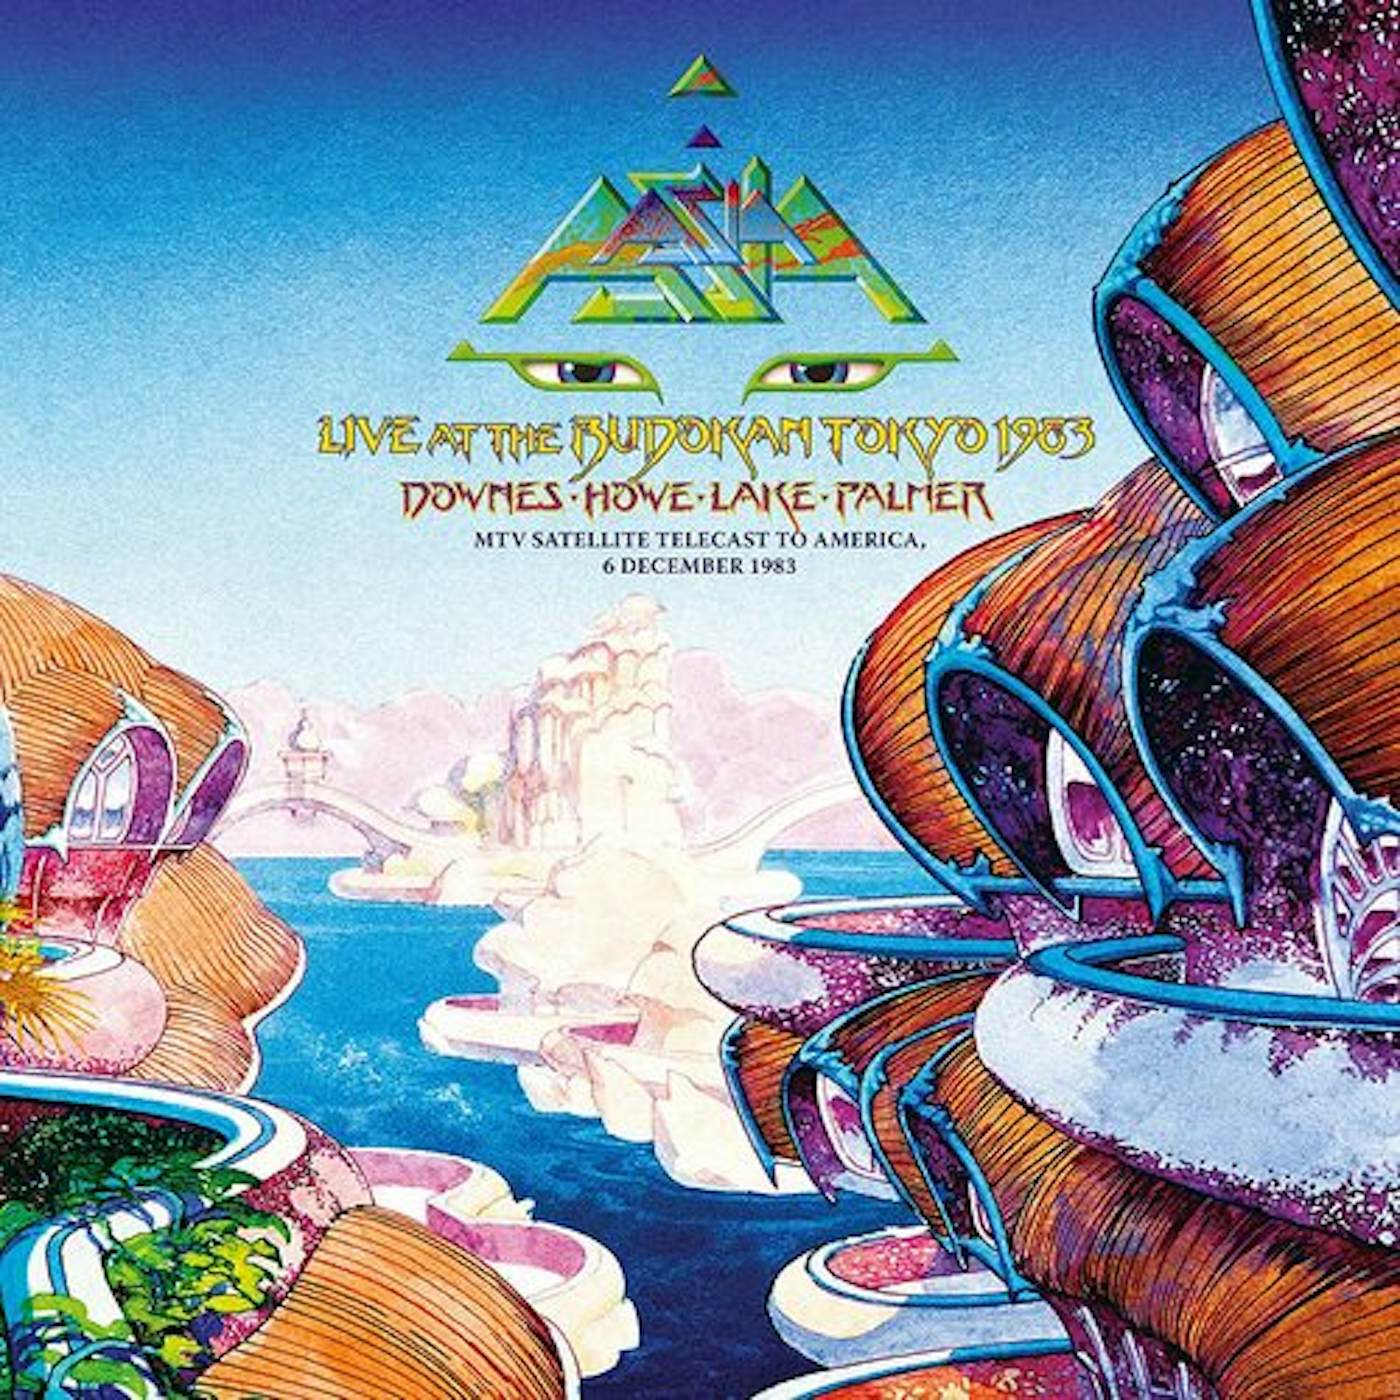 Asia In Asia - Live At The Budokan Tokyo 1983 Vinyl Record